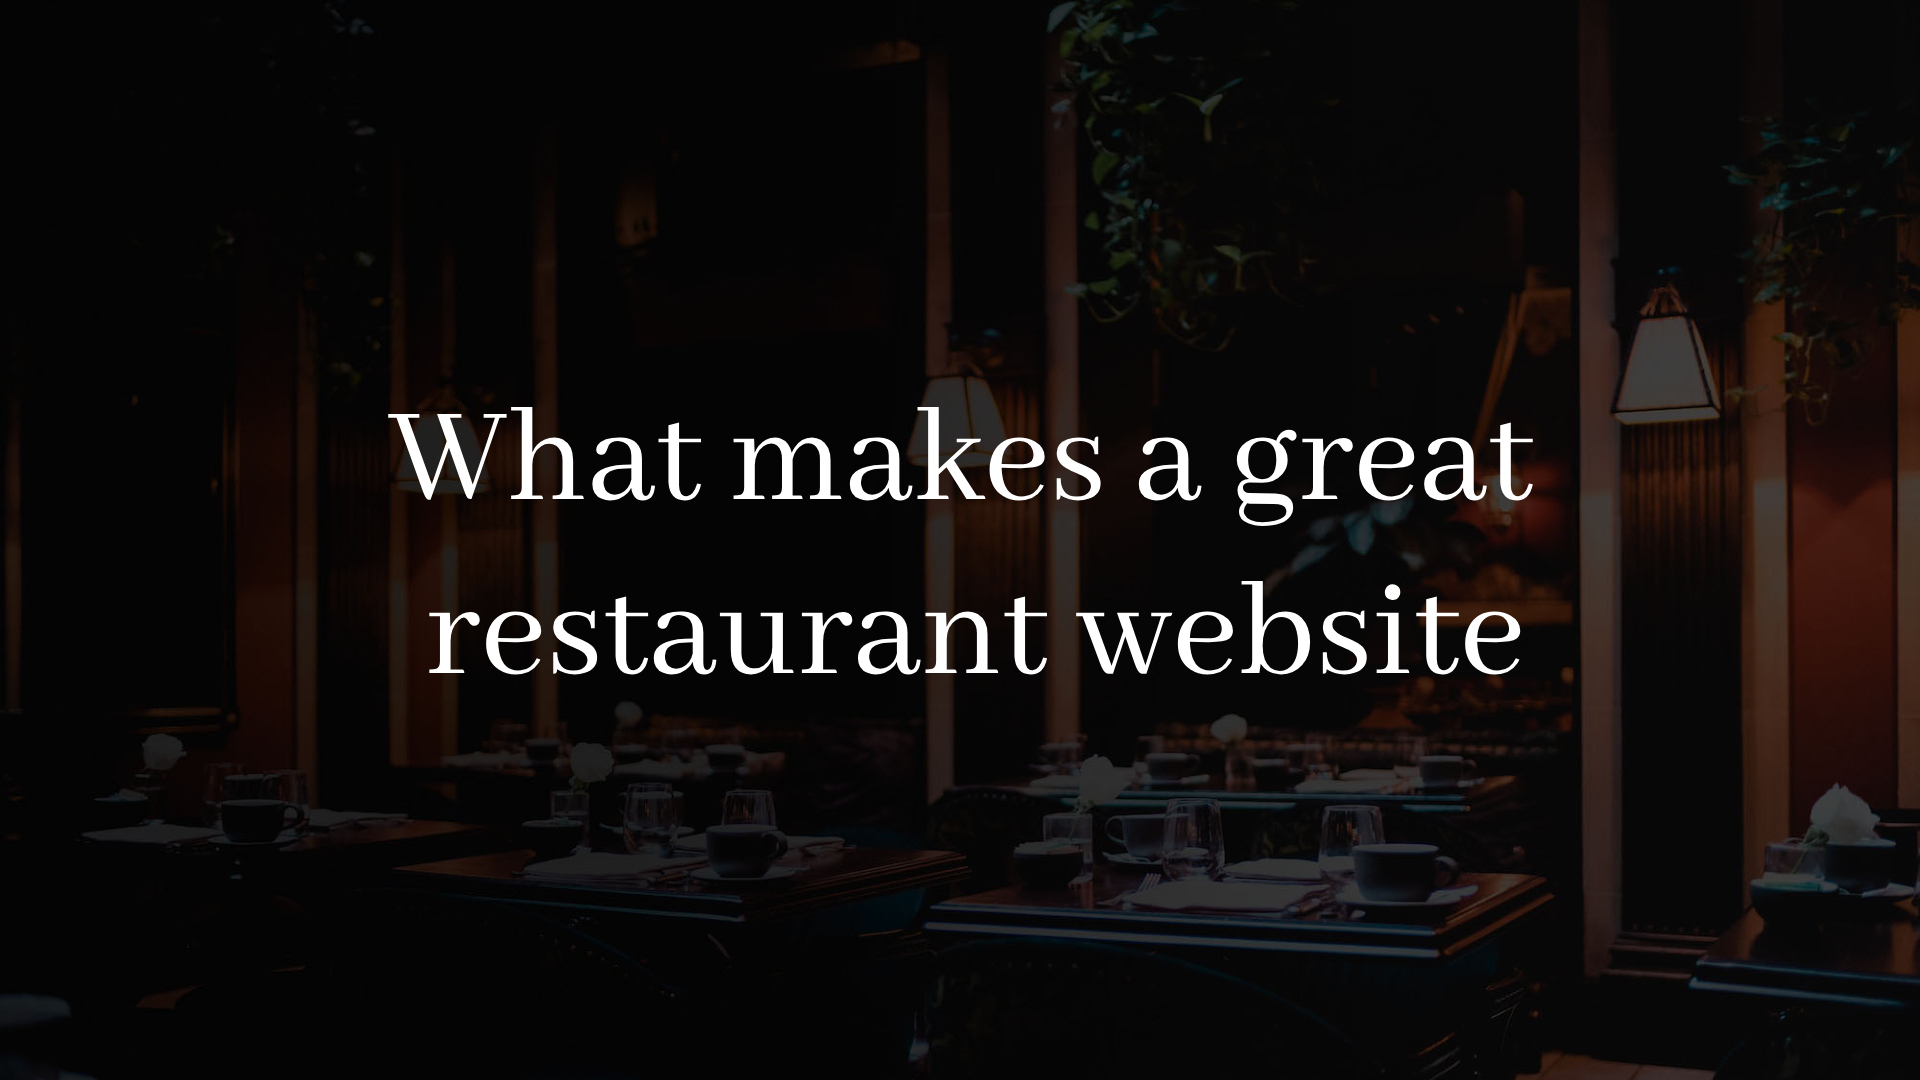 What makes a great restaurant website